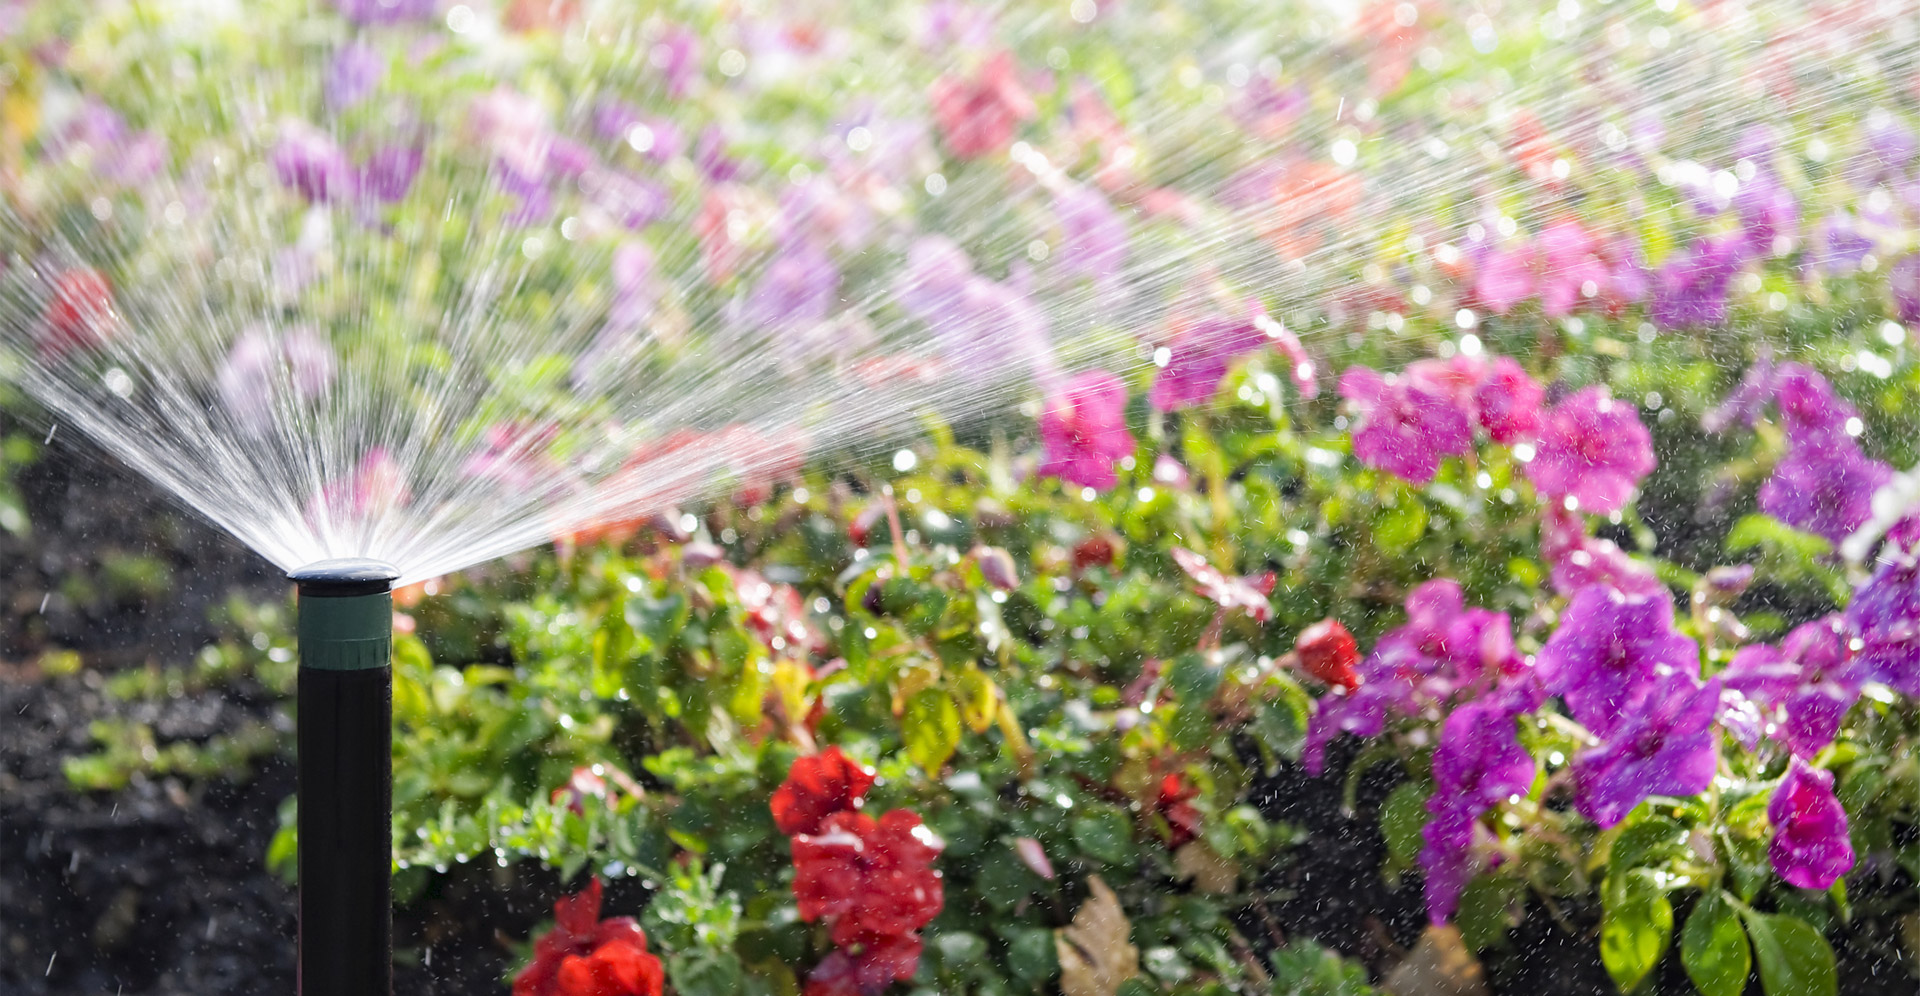 Lawn Sprinklers & Irrigation Systems Toronto